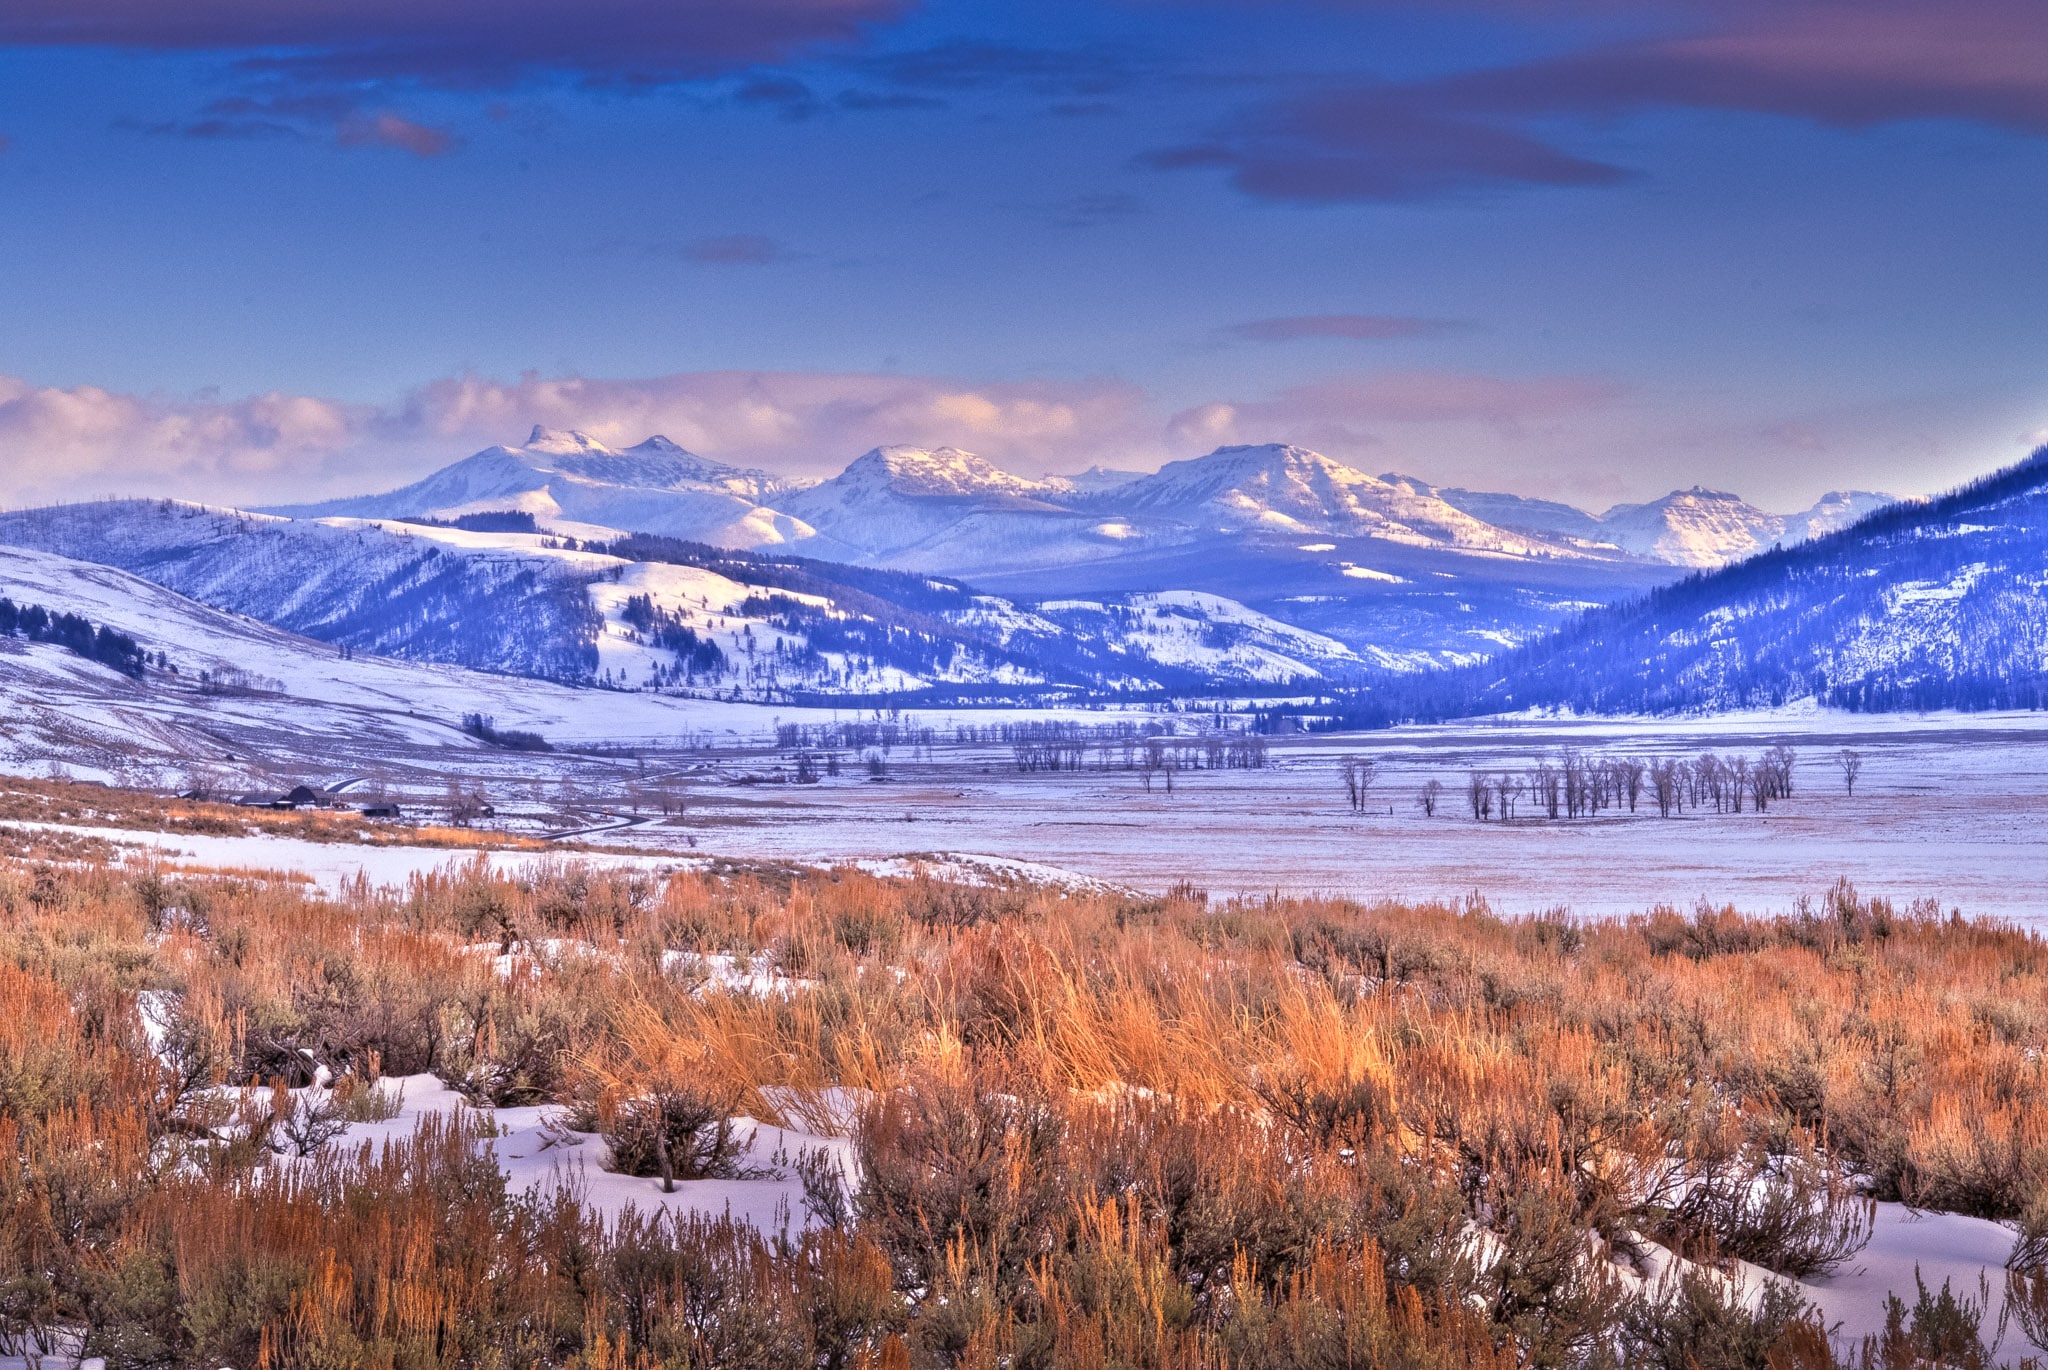 Looking northwest up the Lamar Valley in Yellowstone National Park about a half hour before the sun went behind the mountains to the southeast. The mountain in the distance is Saddleback Mountain.